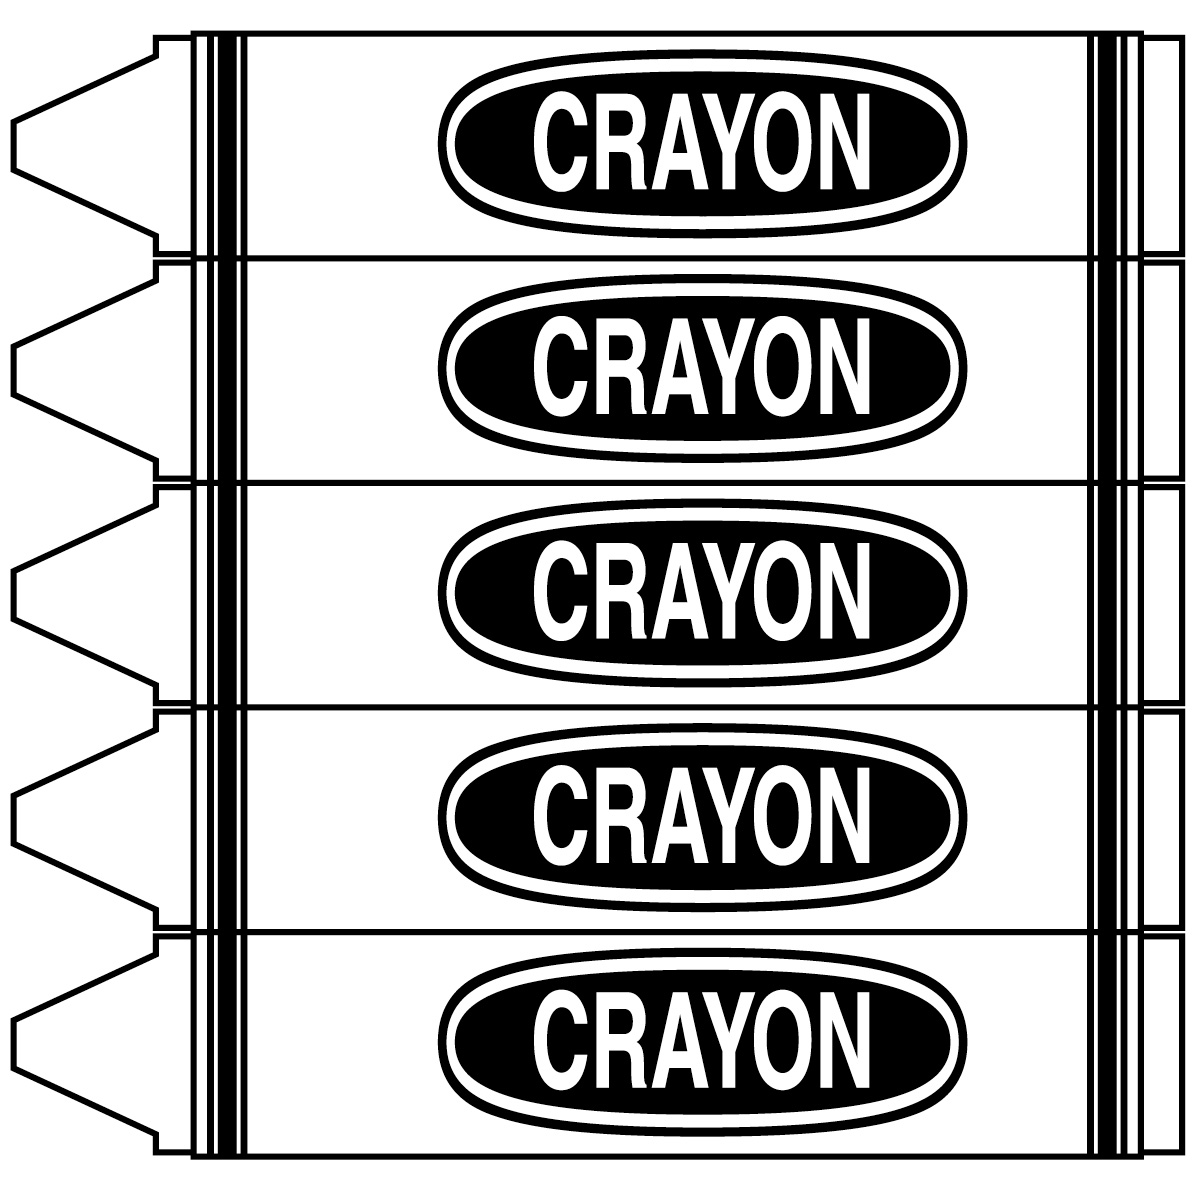 Free Crayon Template, Download Free Crayon Template png images, Free